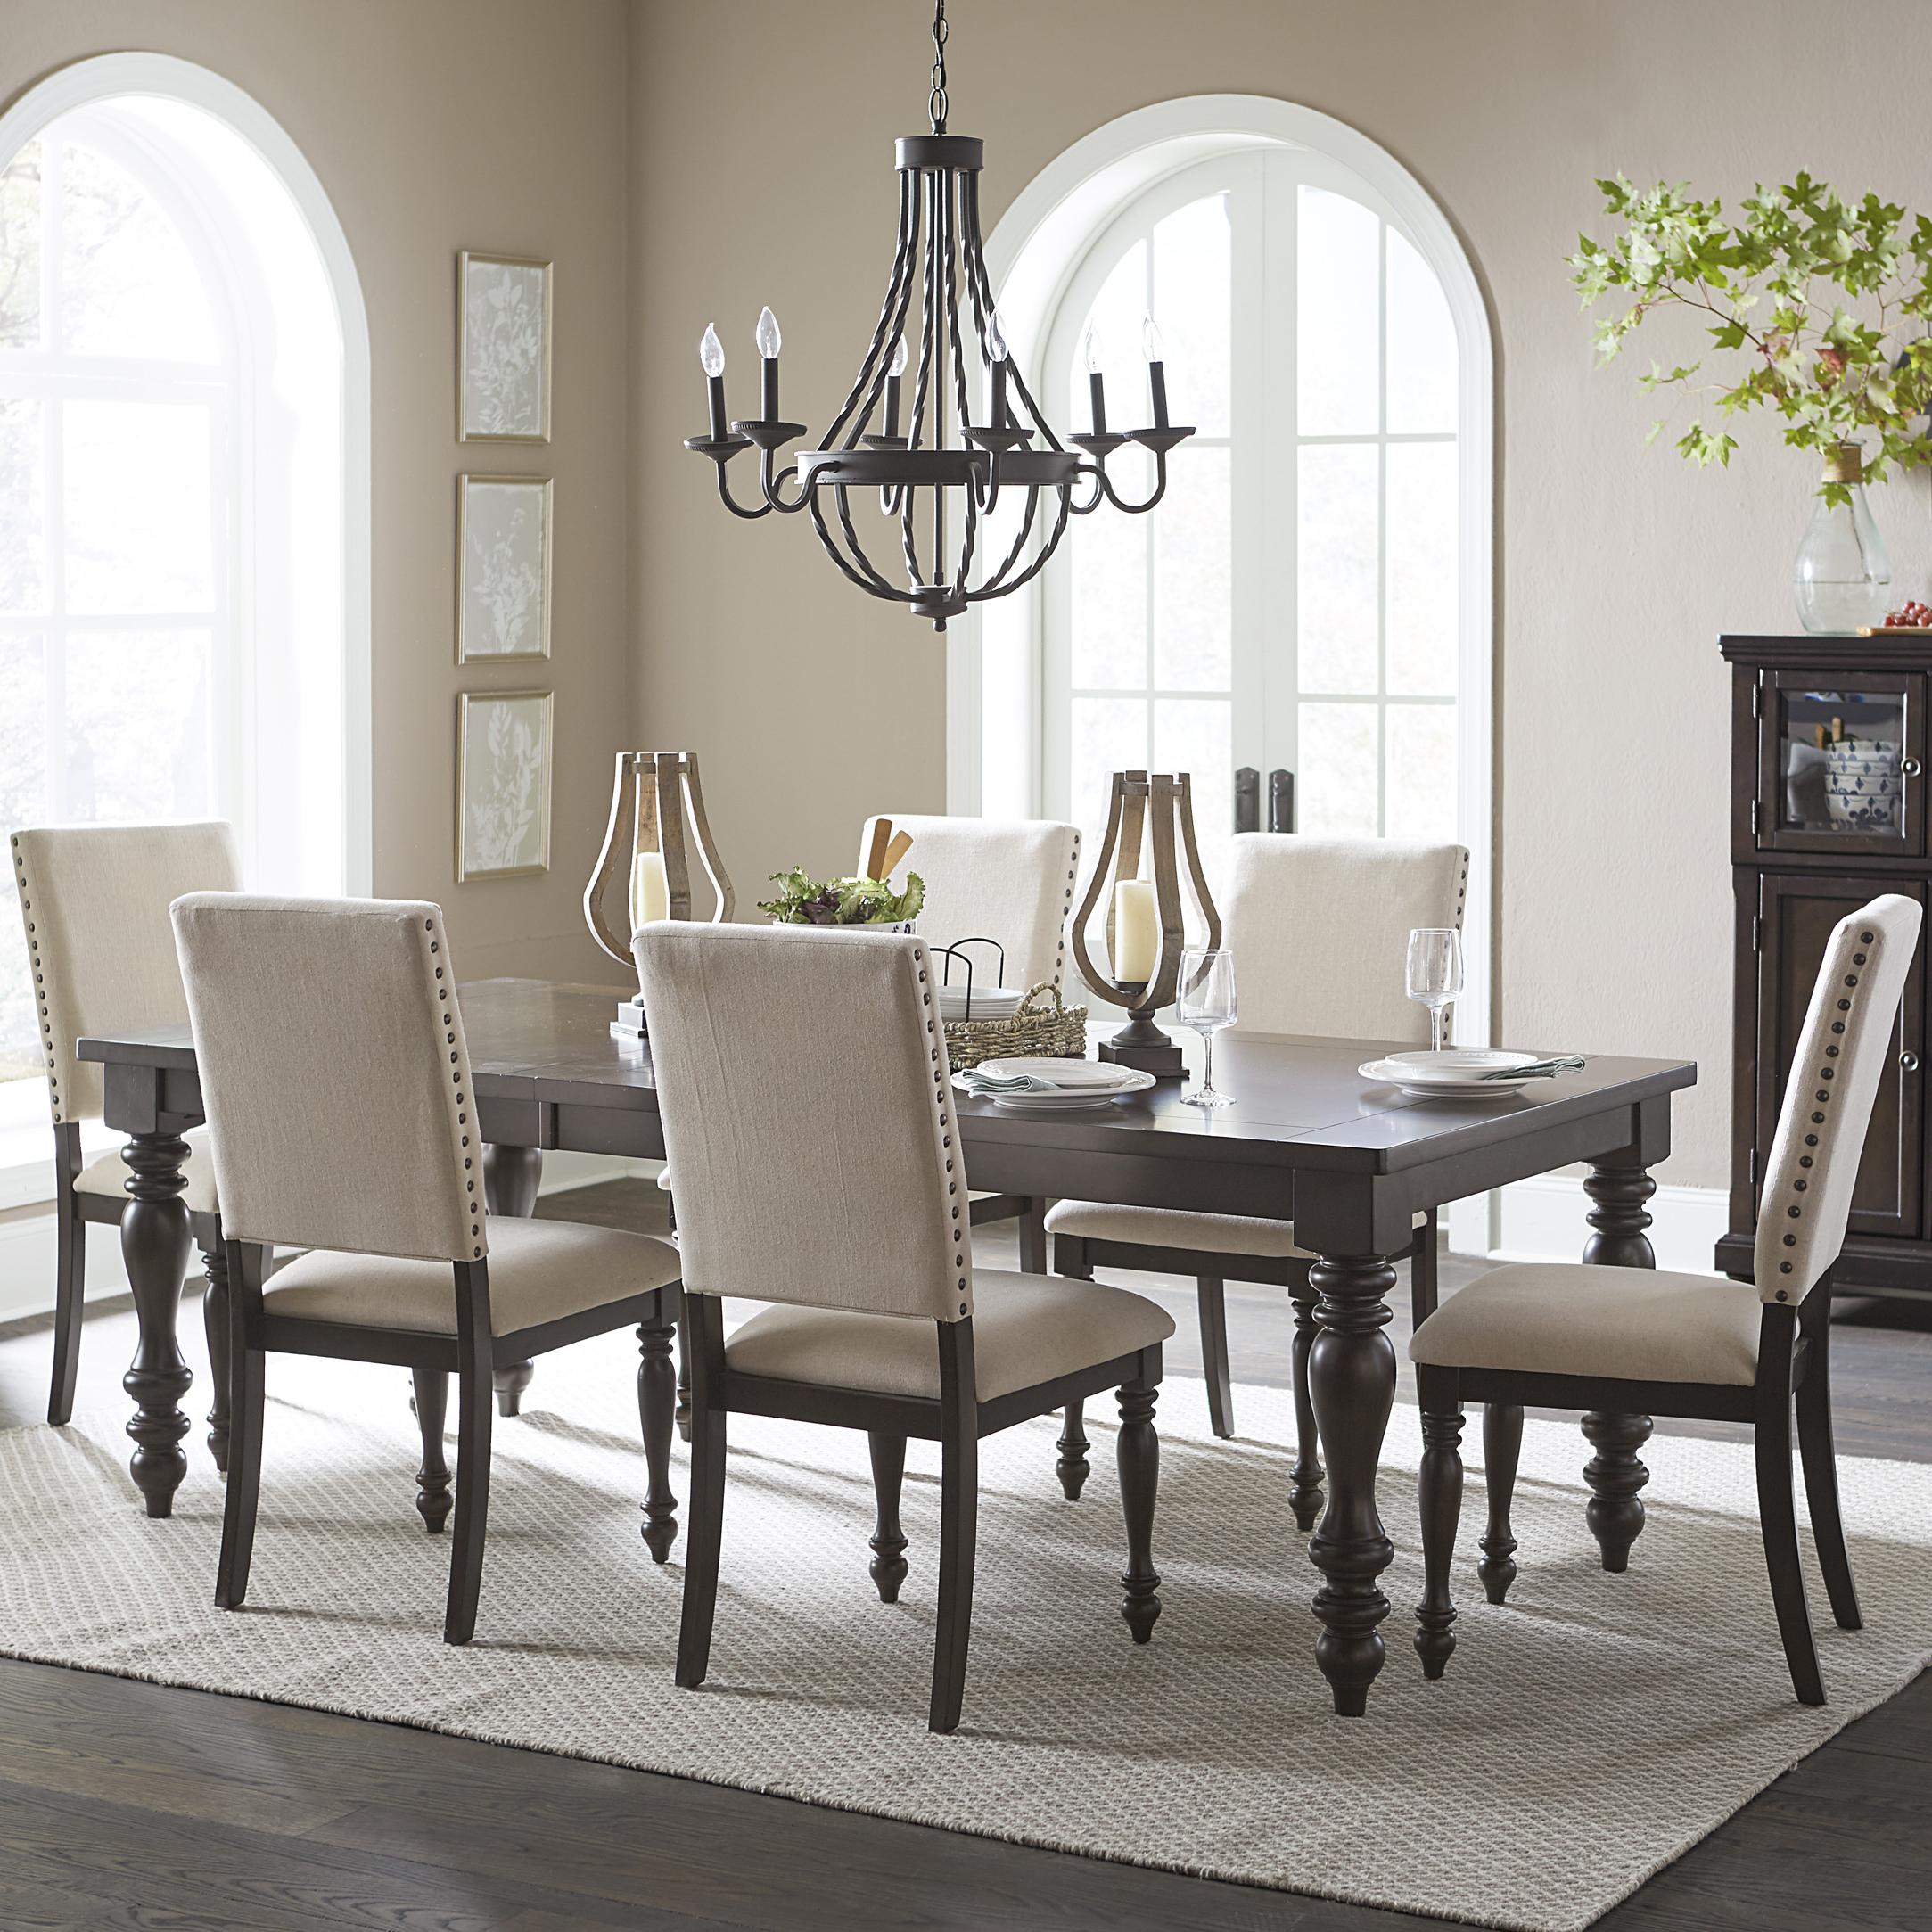 Transitional Dining Room Set 1718GY-90*5PC Begonia 1718GY-90*5PC in Grayish Brown Fabric